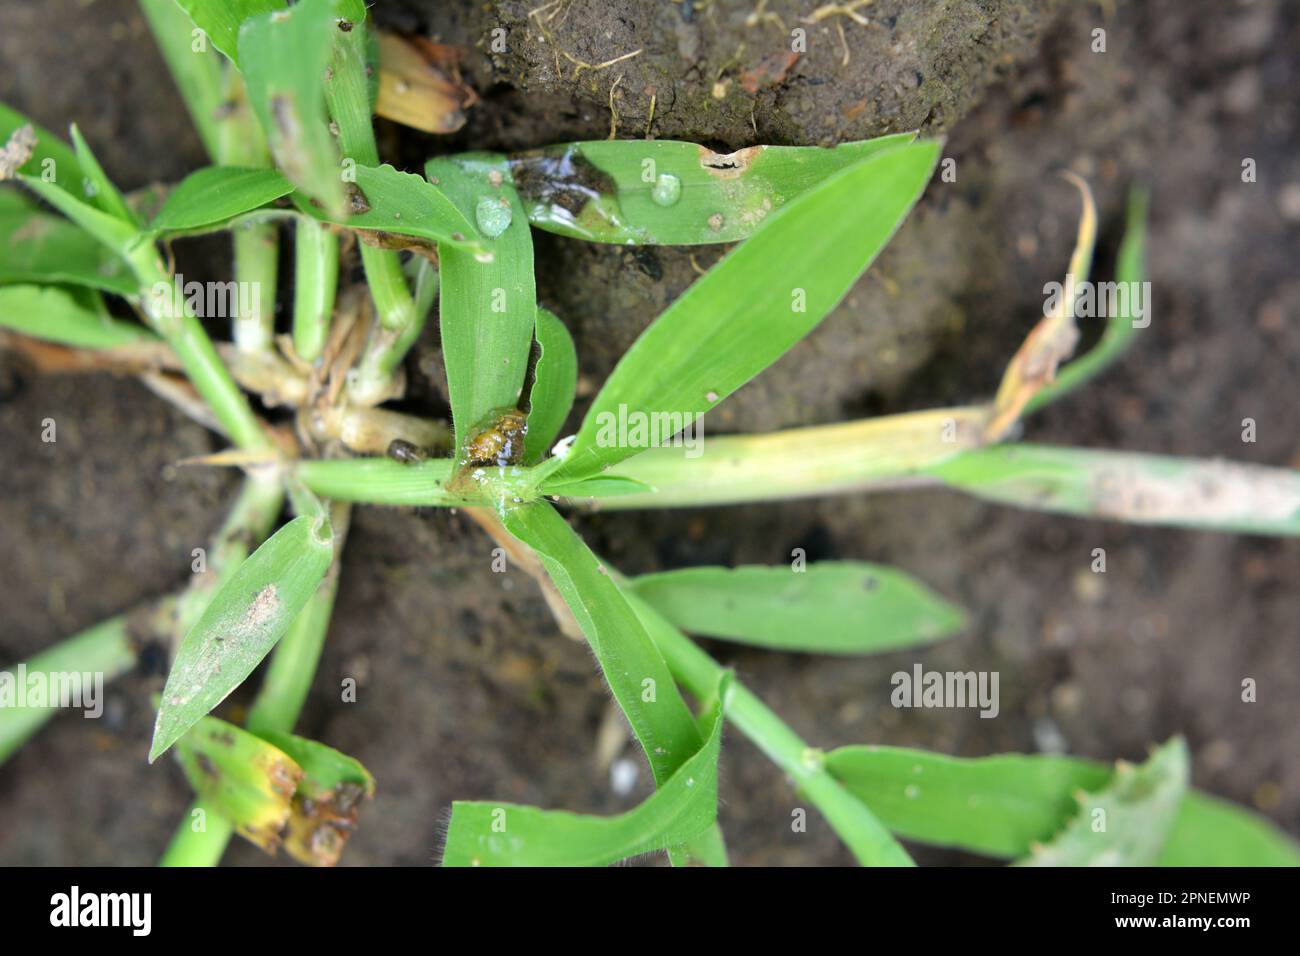 In the wild, Digitaria sanguinalis grows in the field like a weed Stock Photo